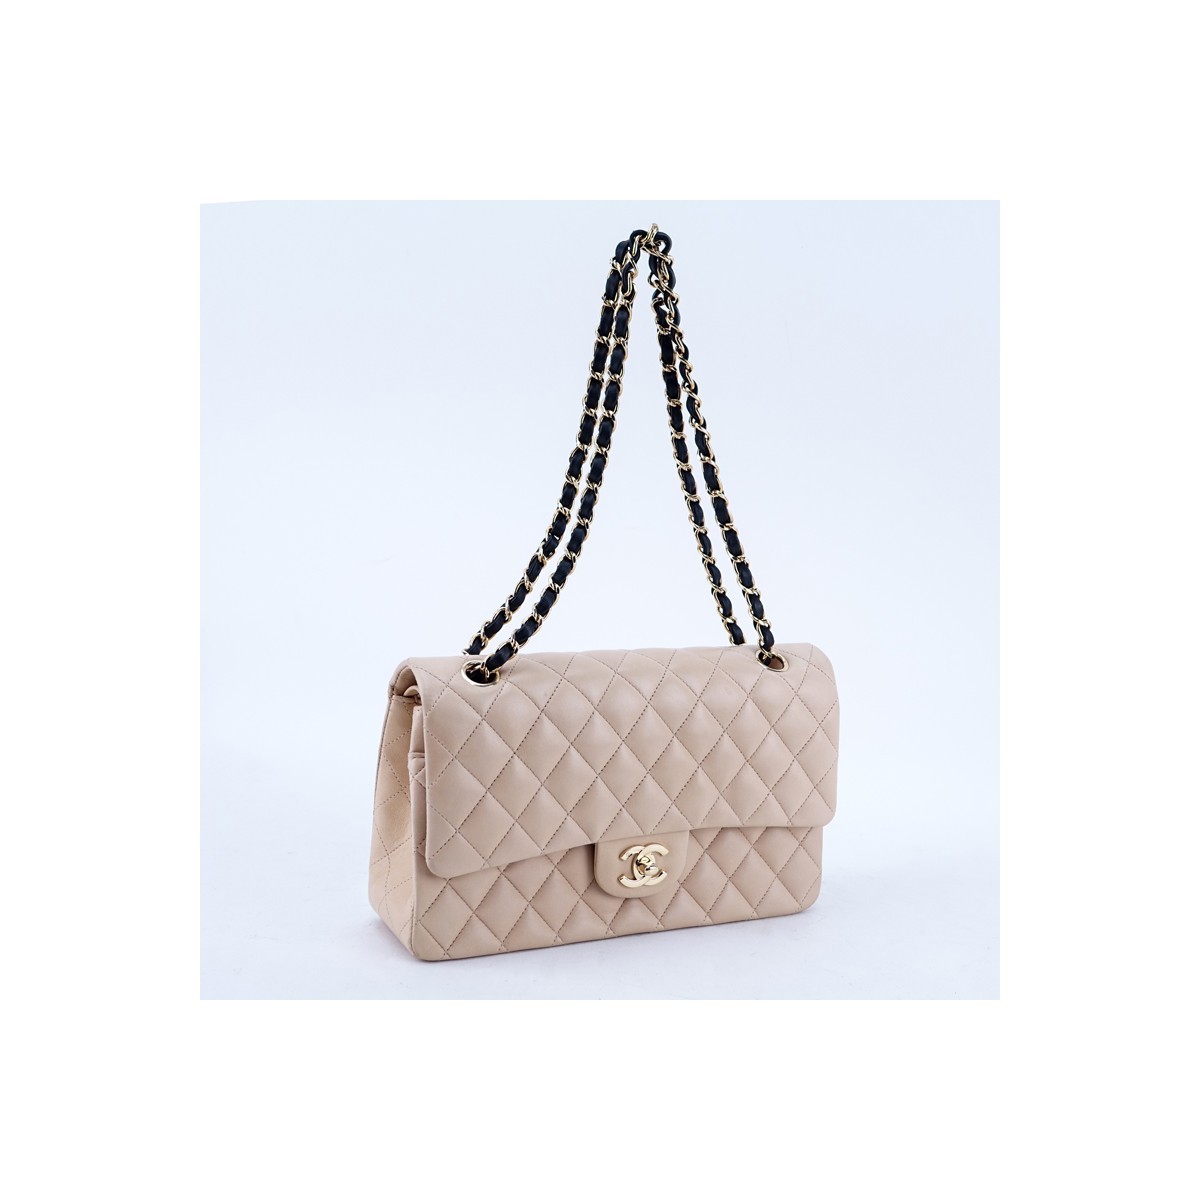 Chanel Light Beige Quilted Leather Bicolor Classic Double Flap 26 Bag. Gold tone hardware, beige interior with zippered and patch pockets, chain interlaced with leather.